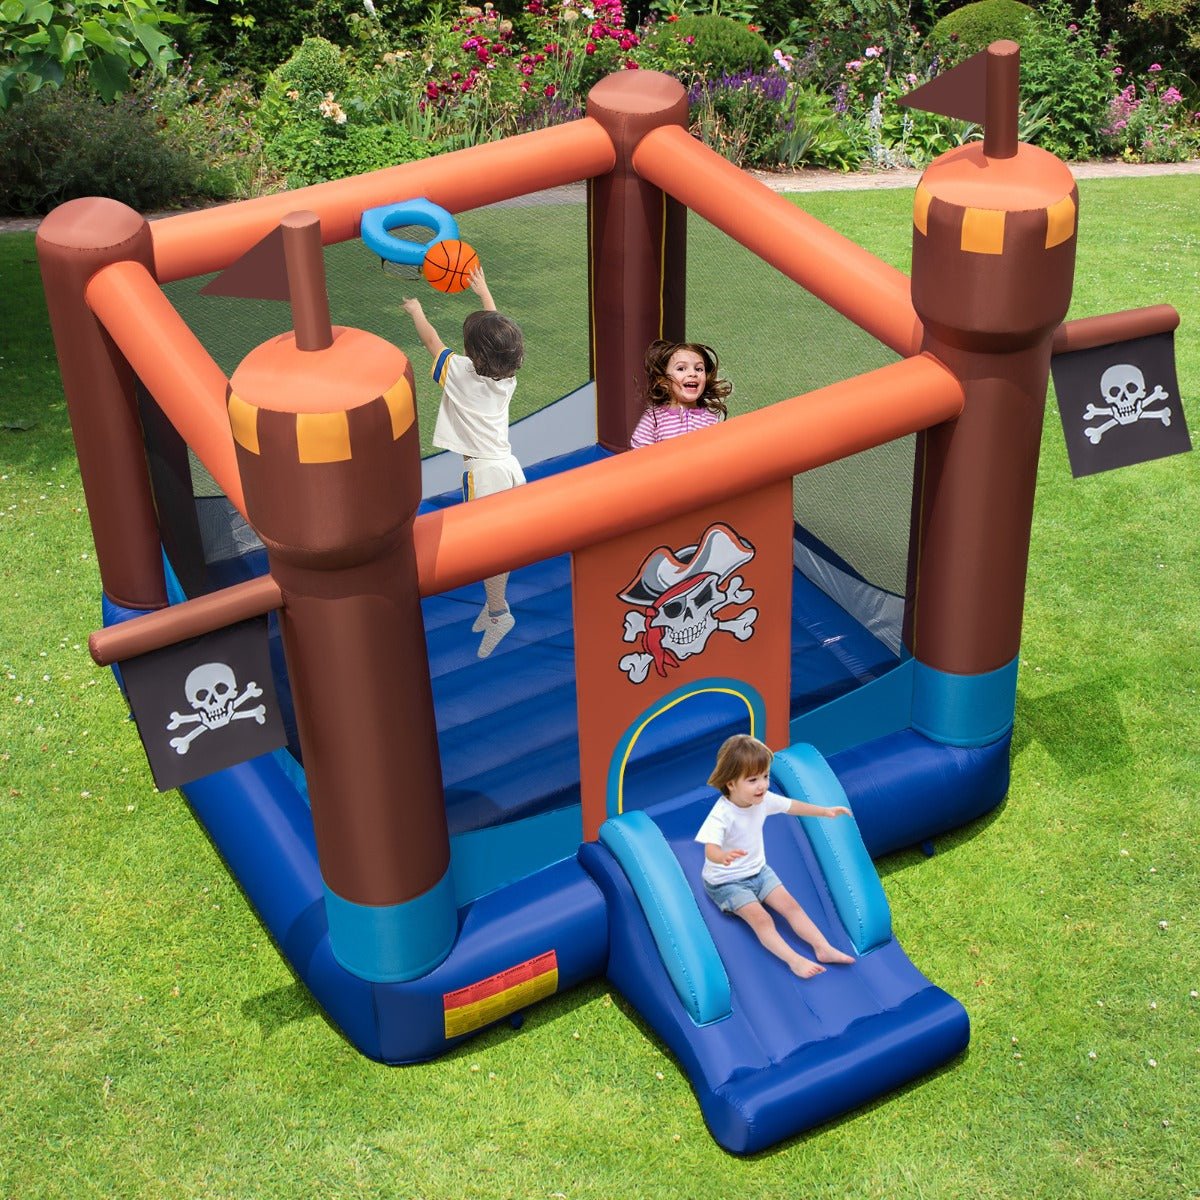 Kids Bounce House with Basketball Hoop - Outdoor Fun and Games